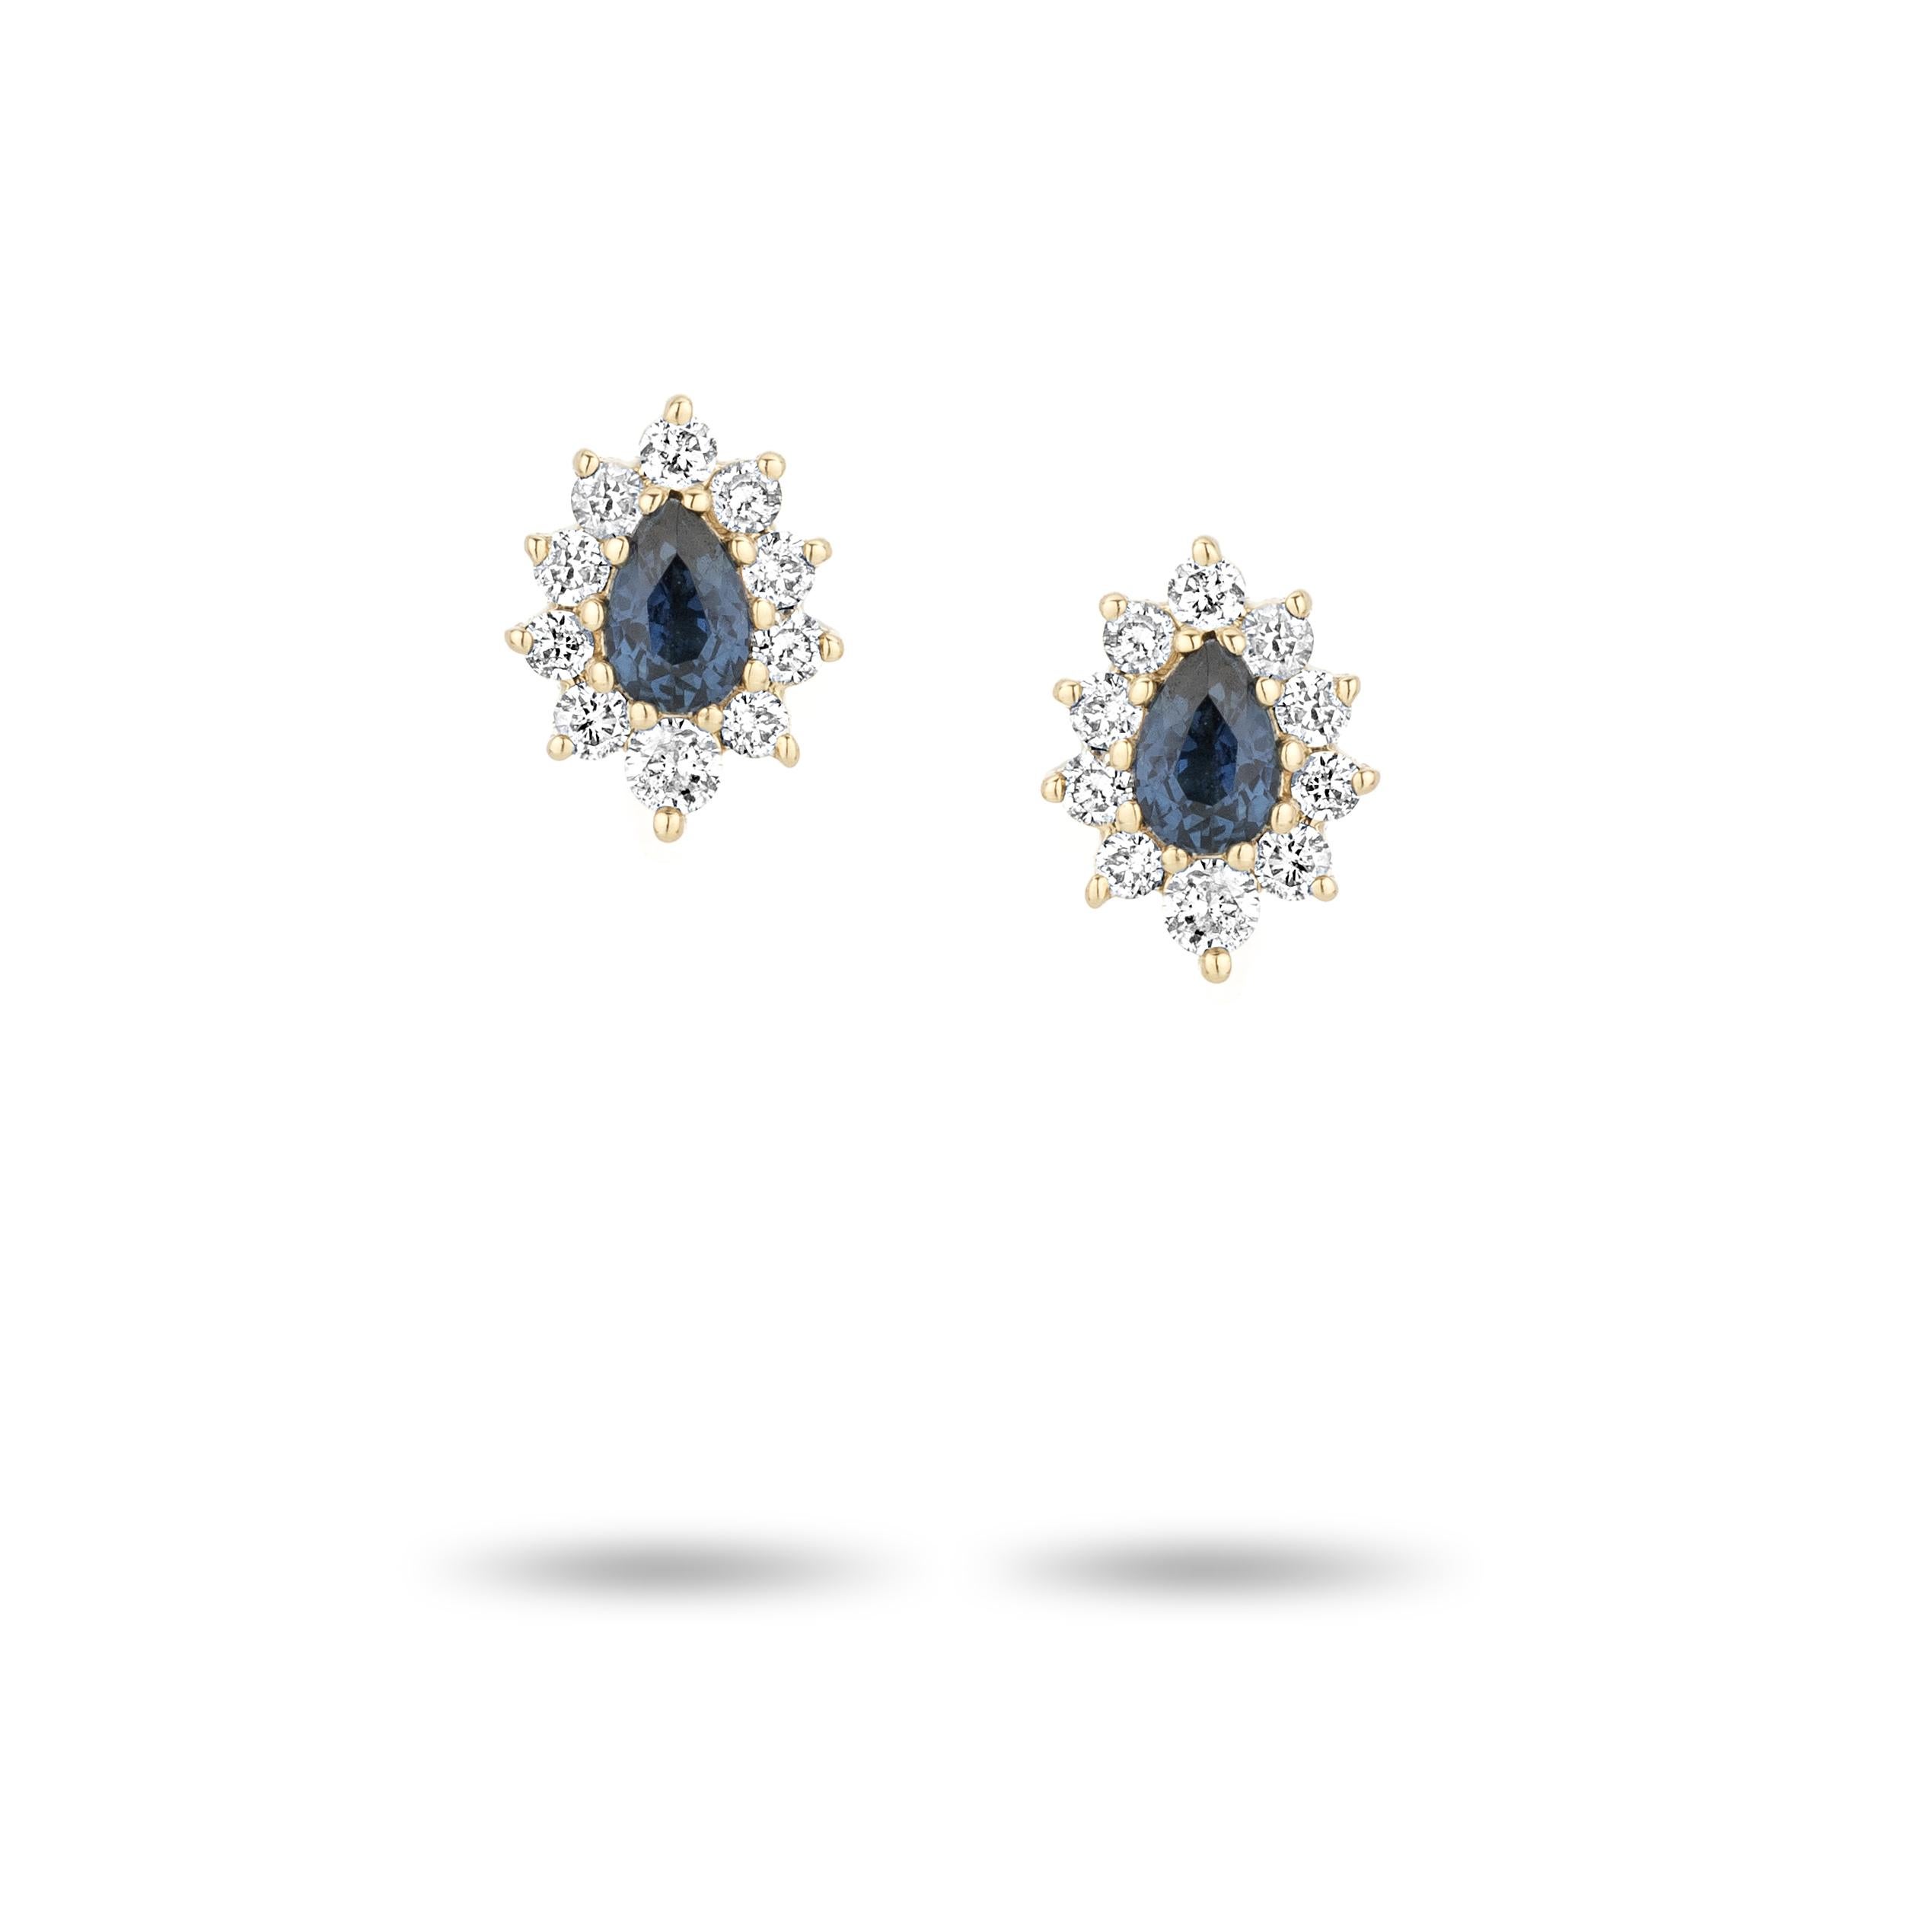 Adina Reyter Diana Sapphire + Diamond Teardrop Posts - Y14

Regal and refined. These Princess Diana-inspired earrings with royal blue sapphires surrounded by a bed of luminous white diamonds is a instant heirloom piece.

This earring is comprised of